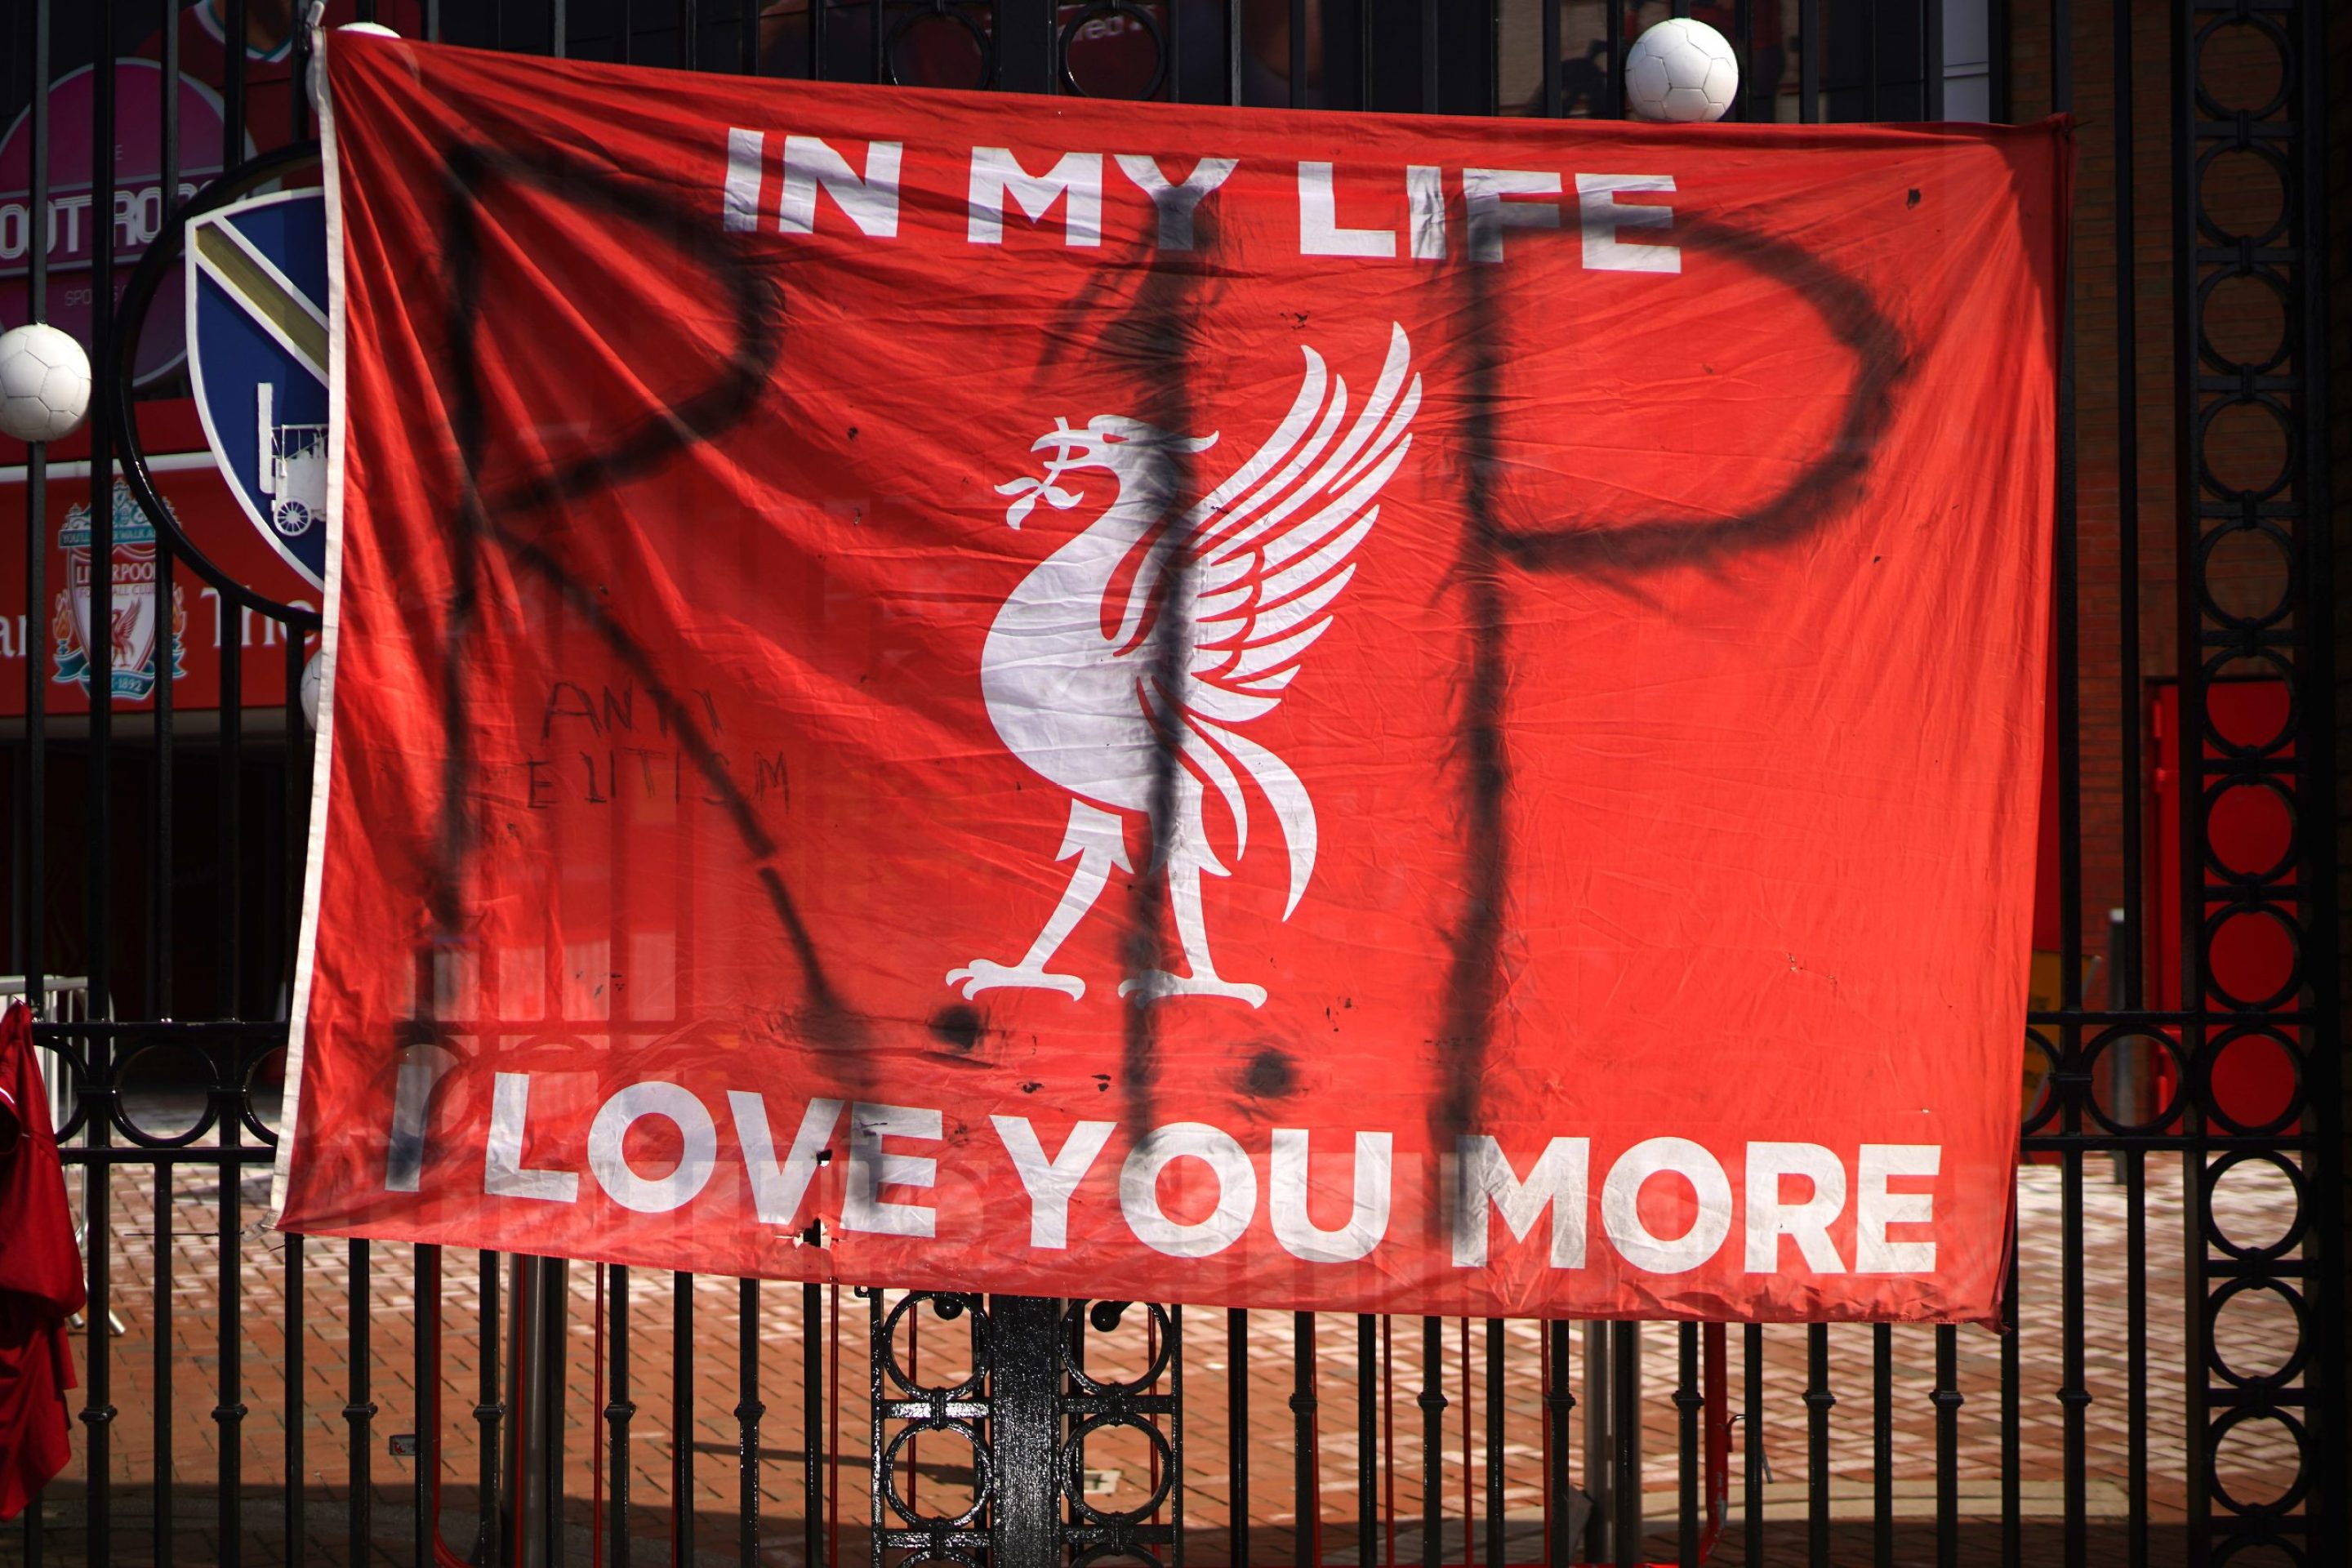 Banners and football scarves are tied to the fences around Anfield Stadium, the home of Liverpool Football Club, in protest at the club's intentions to join the European Super League on April 20, 2021 in Liverpool, United Kingdom.